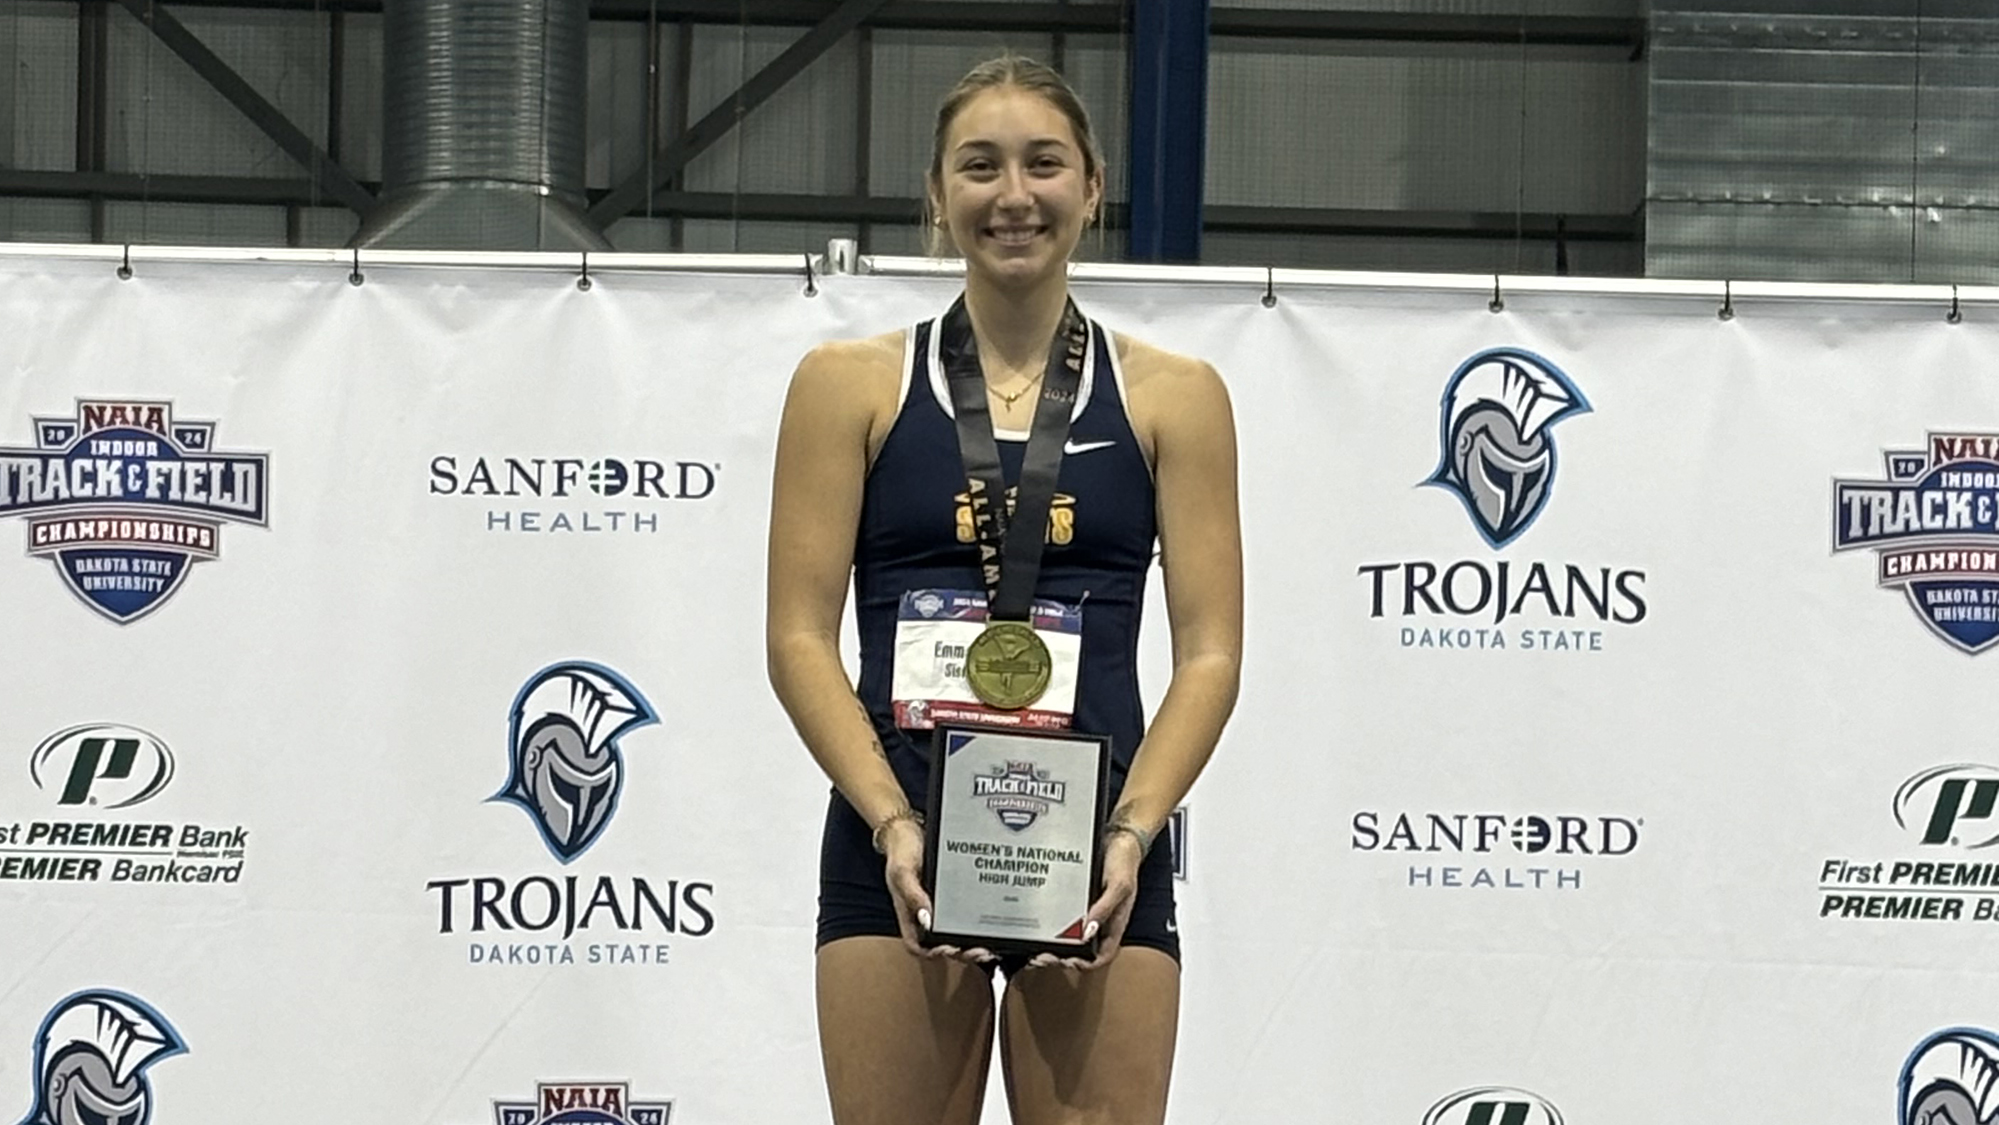 Valentine's Day in March: High Jumper Wins NAIA Indoor Championship